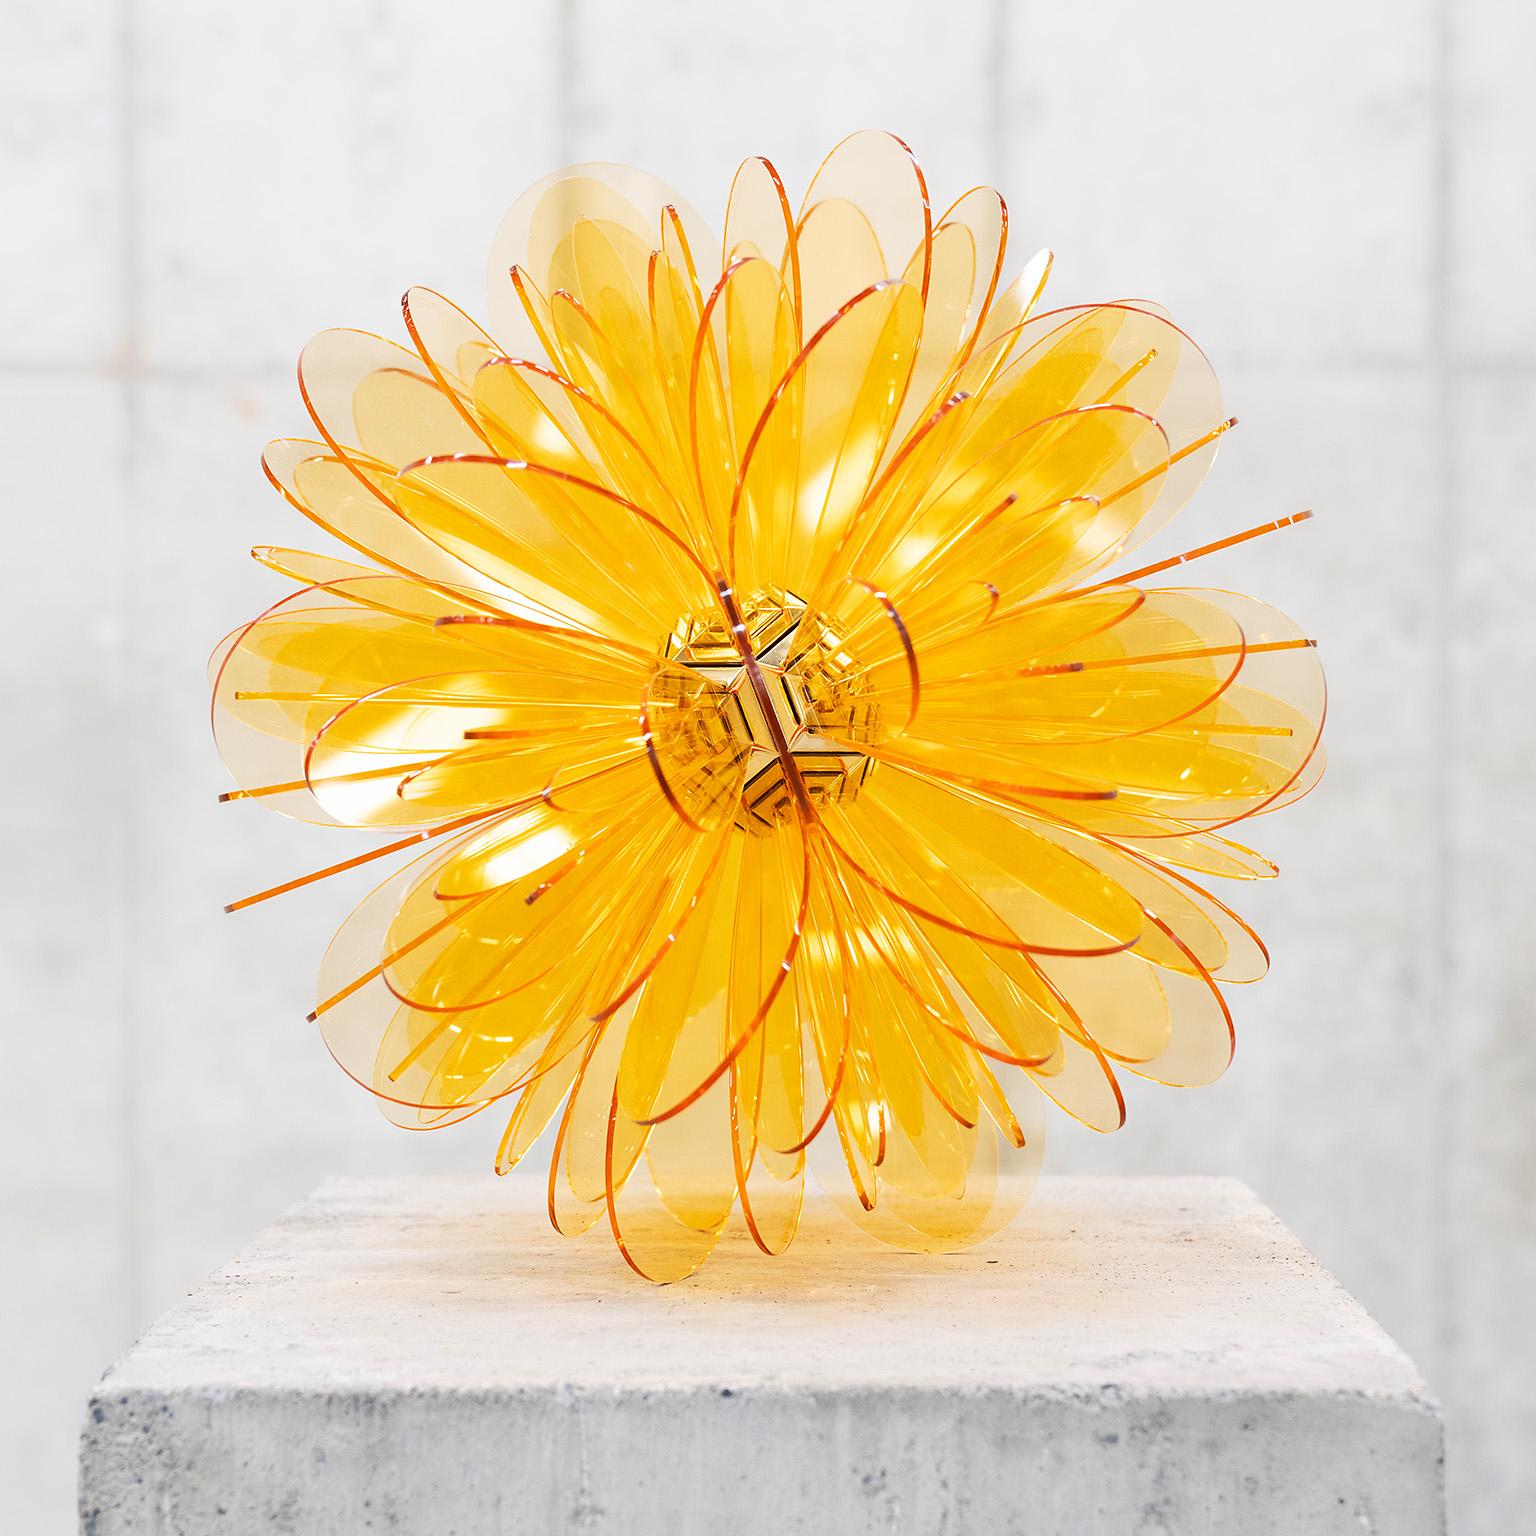 "Bloom No. 8" from the Bloom Series, Abstract, Organic Sculpture, Yellow Acrylic